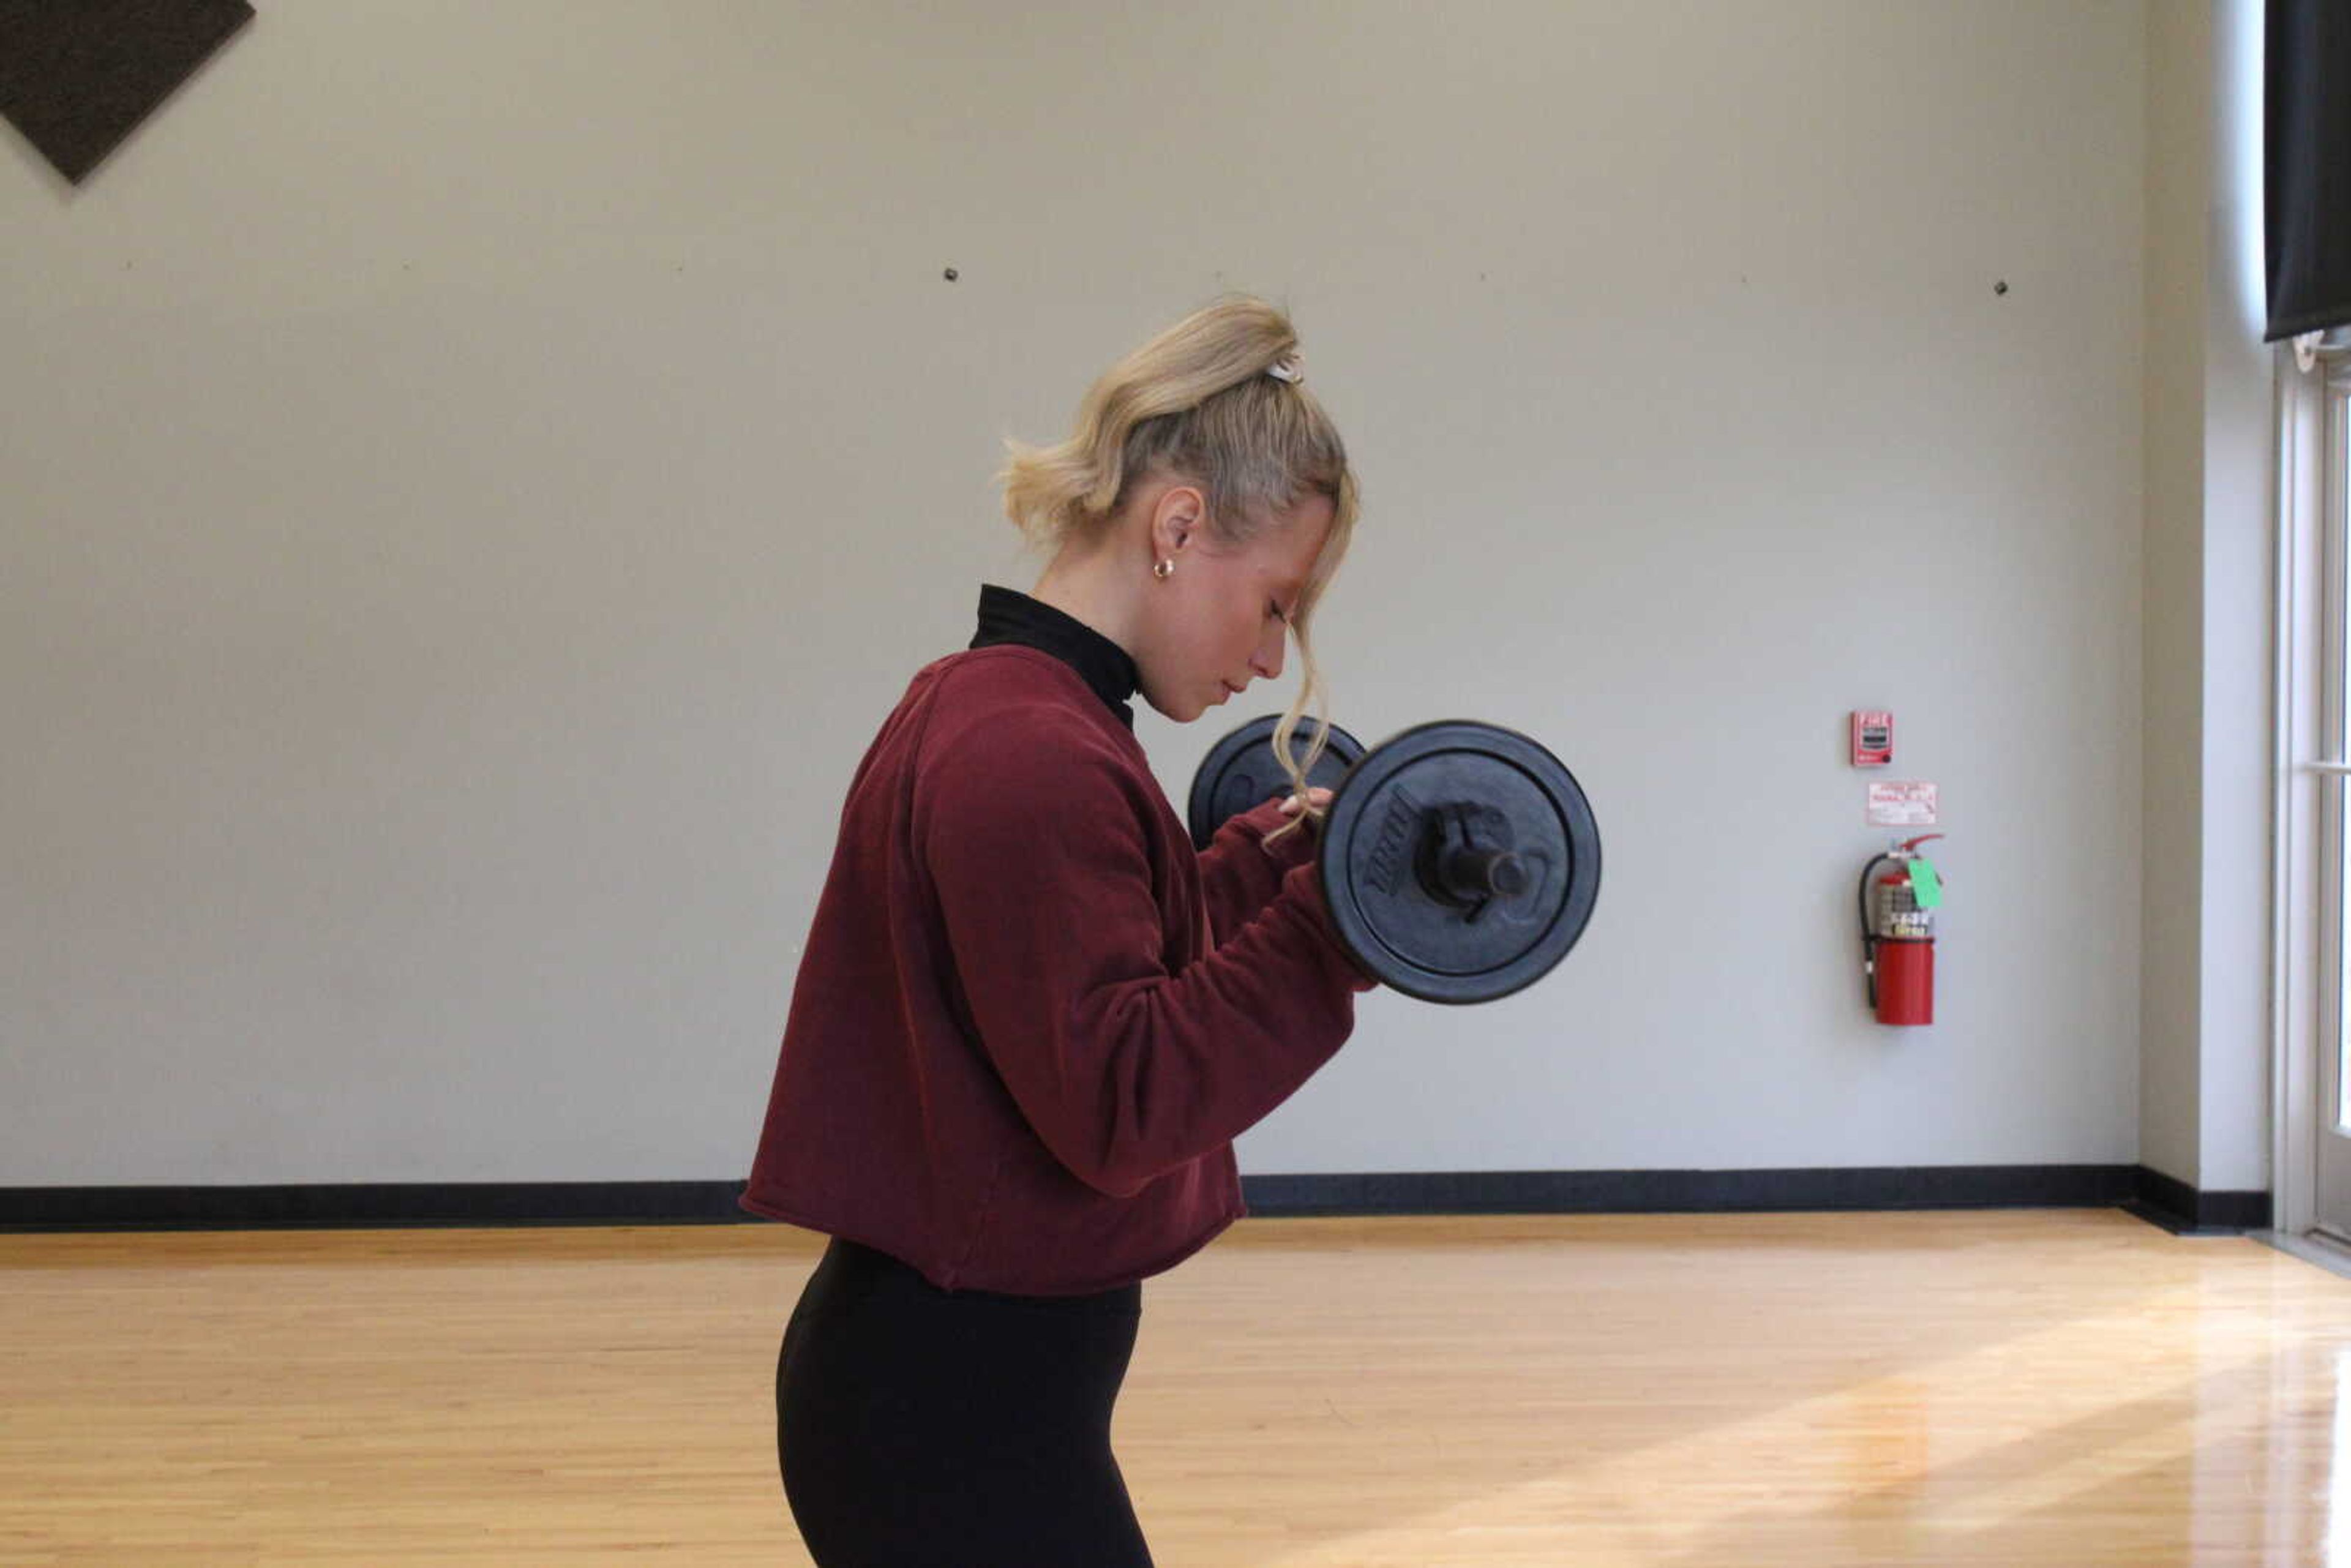 Brinkopf is performing a dumbbell curl-up. She uses this exercise to strengthen her bicep muscles in her upper arms.